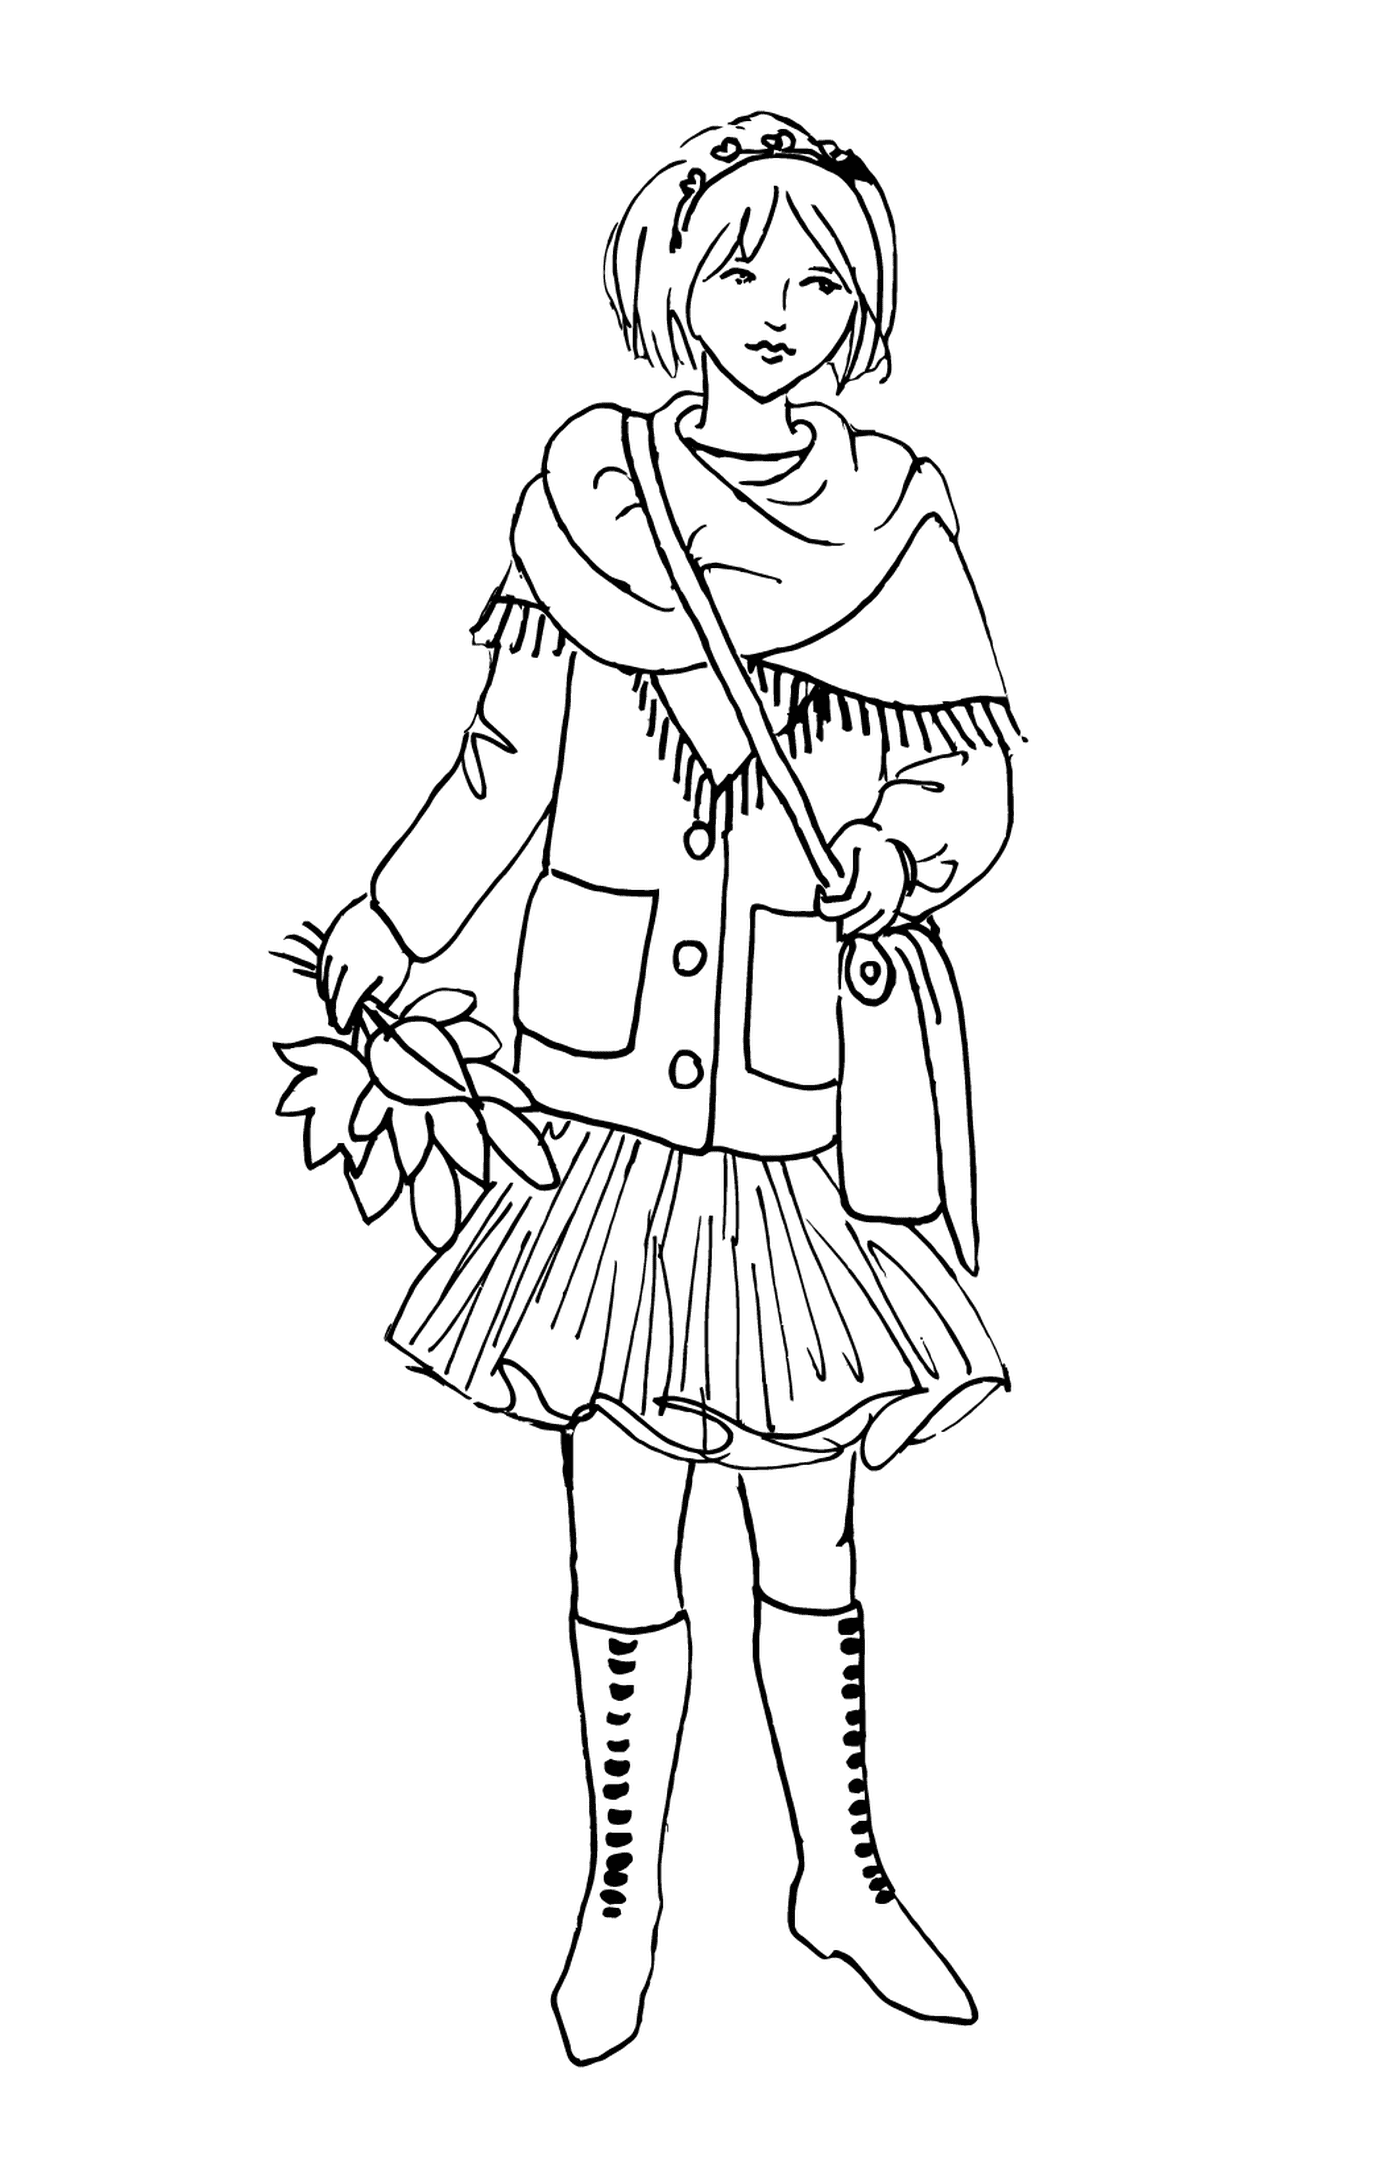  A girl in winter clothes 